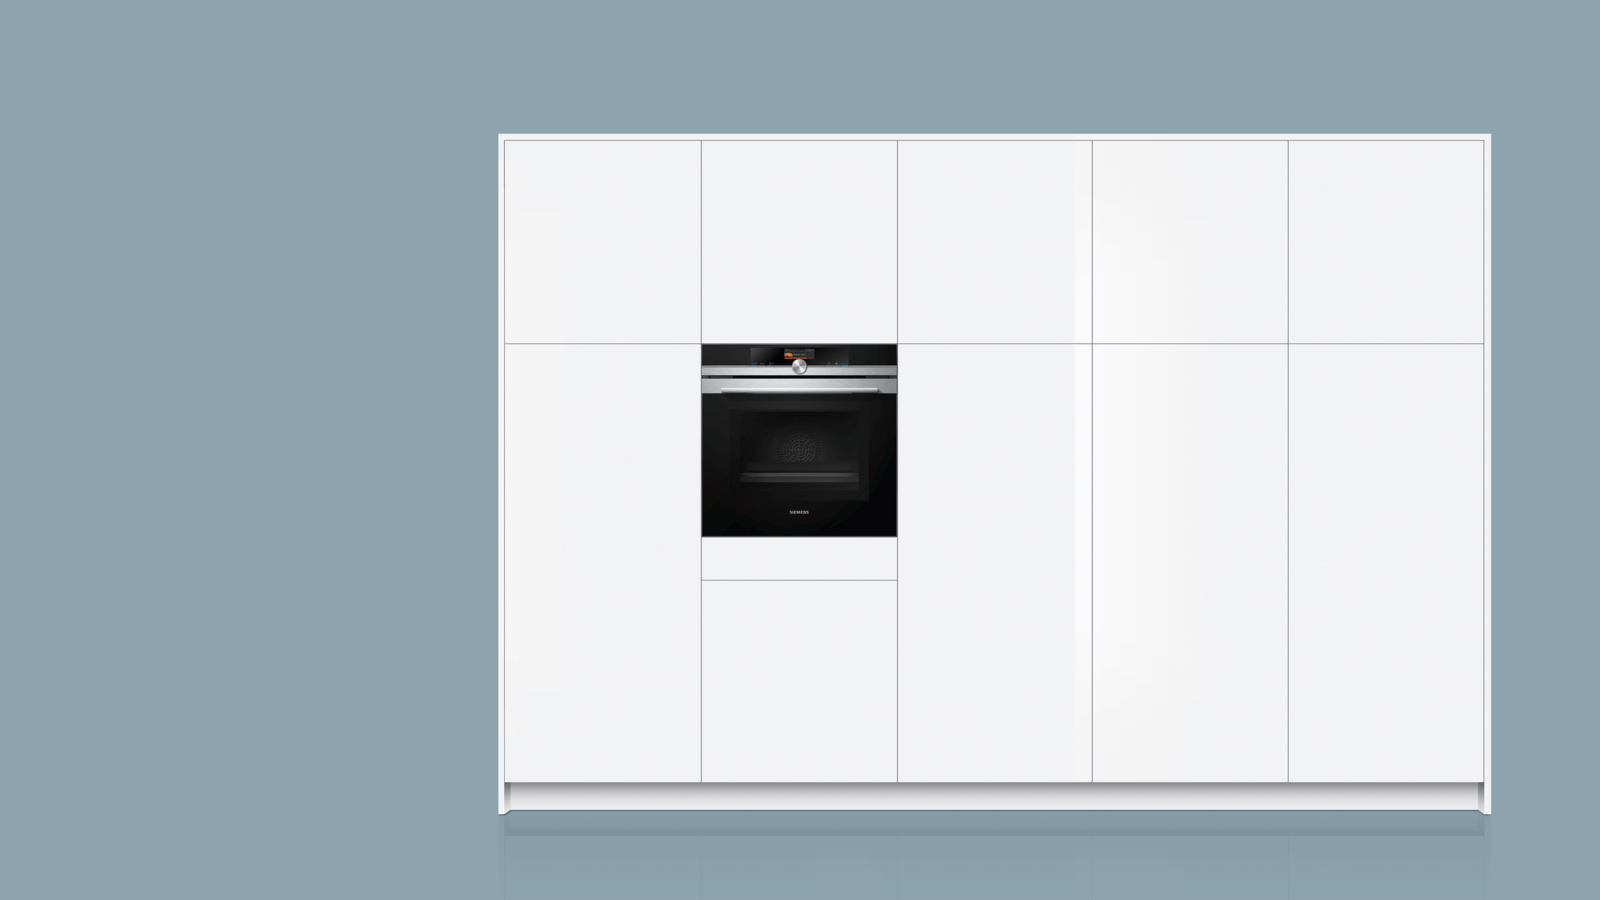 Siemens iQ700 Oven with Microwave HM676G0S6B